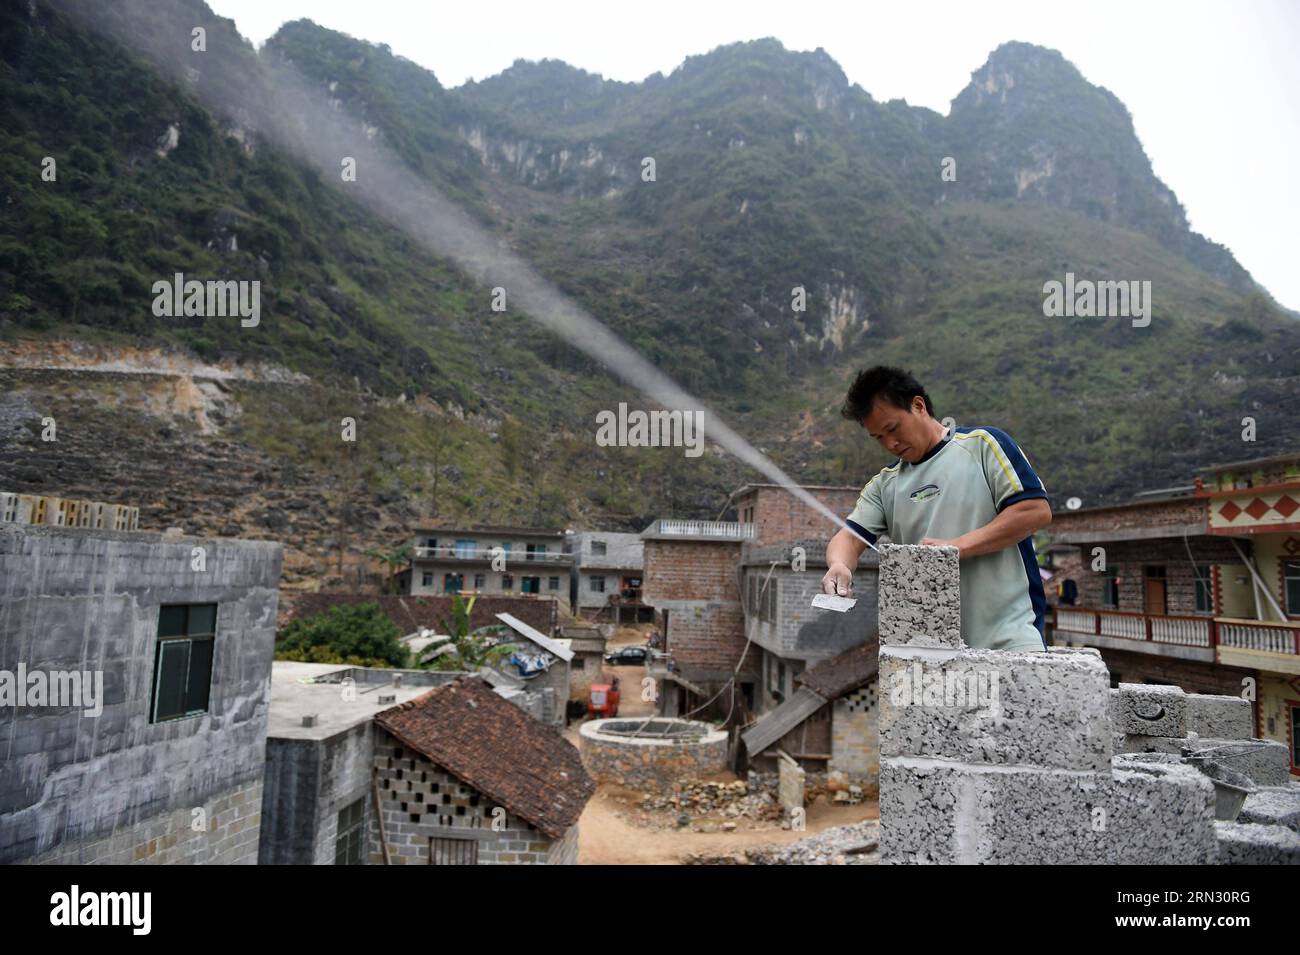 The 40-year-old Meng Guirong builds his new house in Nongding Village of Bansheng Township, southwest China s Guangxi Zhuang Autonomous Region, Feb. 28, 2015. Because of the lack of flatland, most of the families in the western mountainous areas of Dahua build their houses on hills. In Qibainong and Bansheng counties of Dahua, people of the Miao ethnic group have lived in the mountains for about a thousand years. They count on planting corns for their livelihood. Three-story stilted building is the traditional architecture style in the two counties. People raise livestock on the lower floor, r Stock Photo